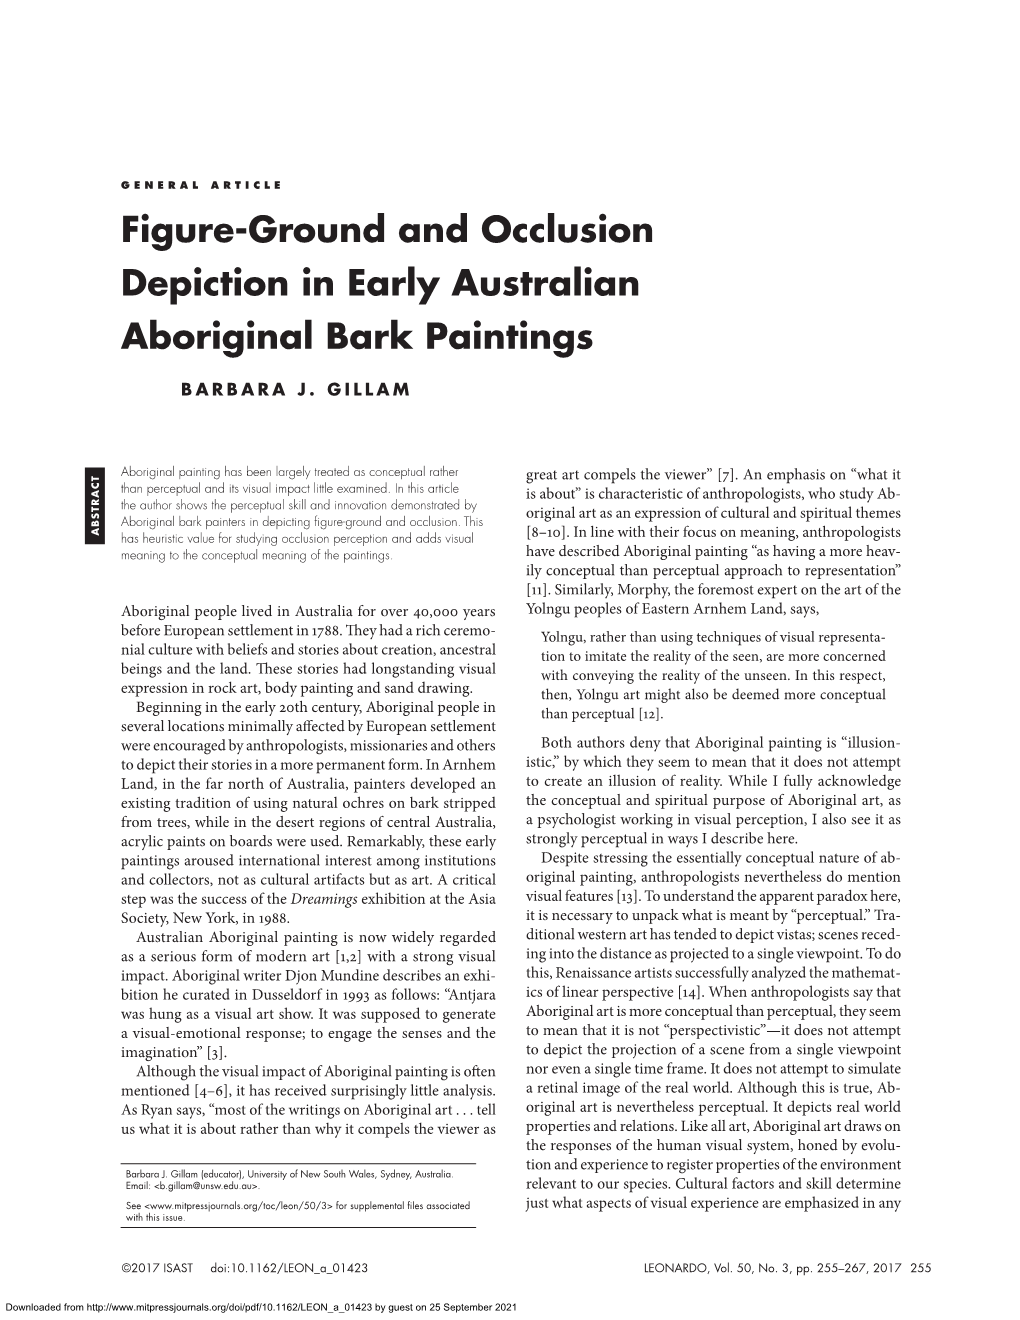 Figure Ground And Occlusion Depiction In Early Australian Aboriginal Bark Paintings 